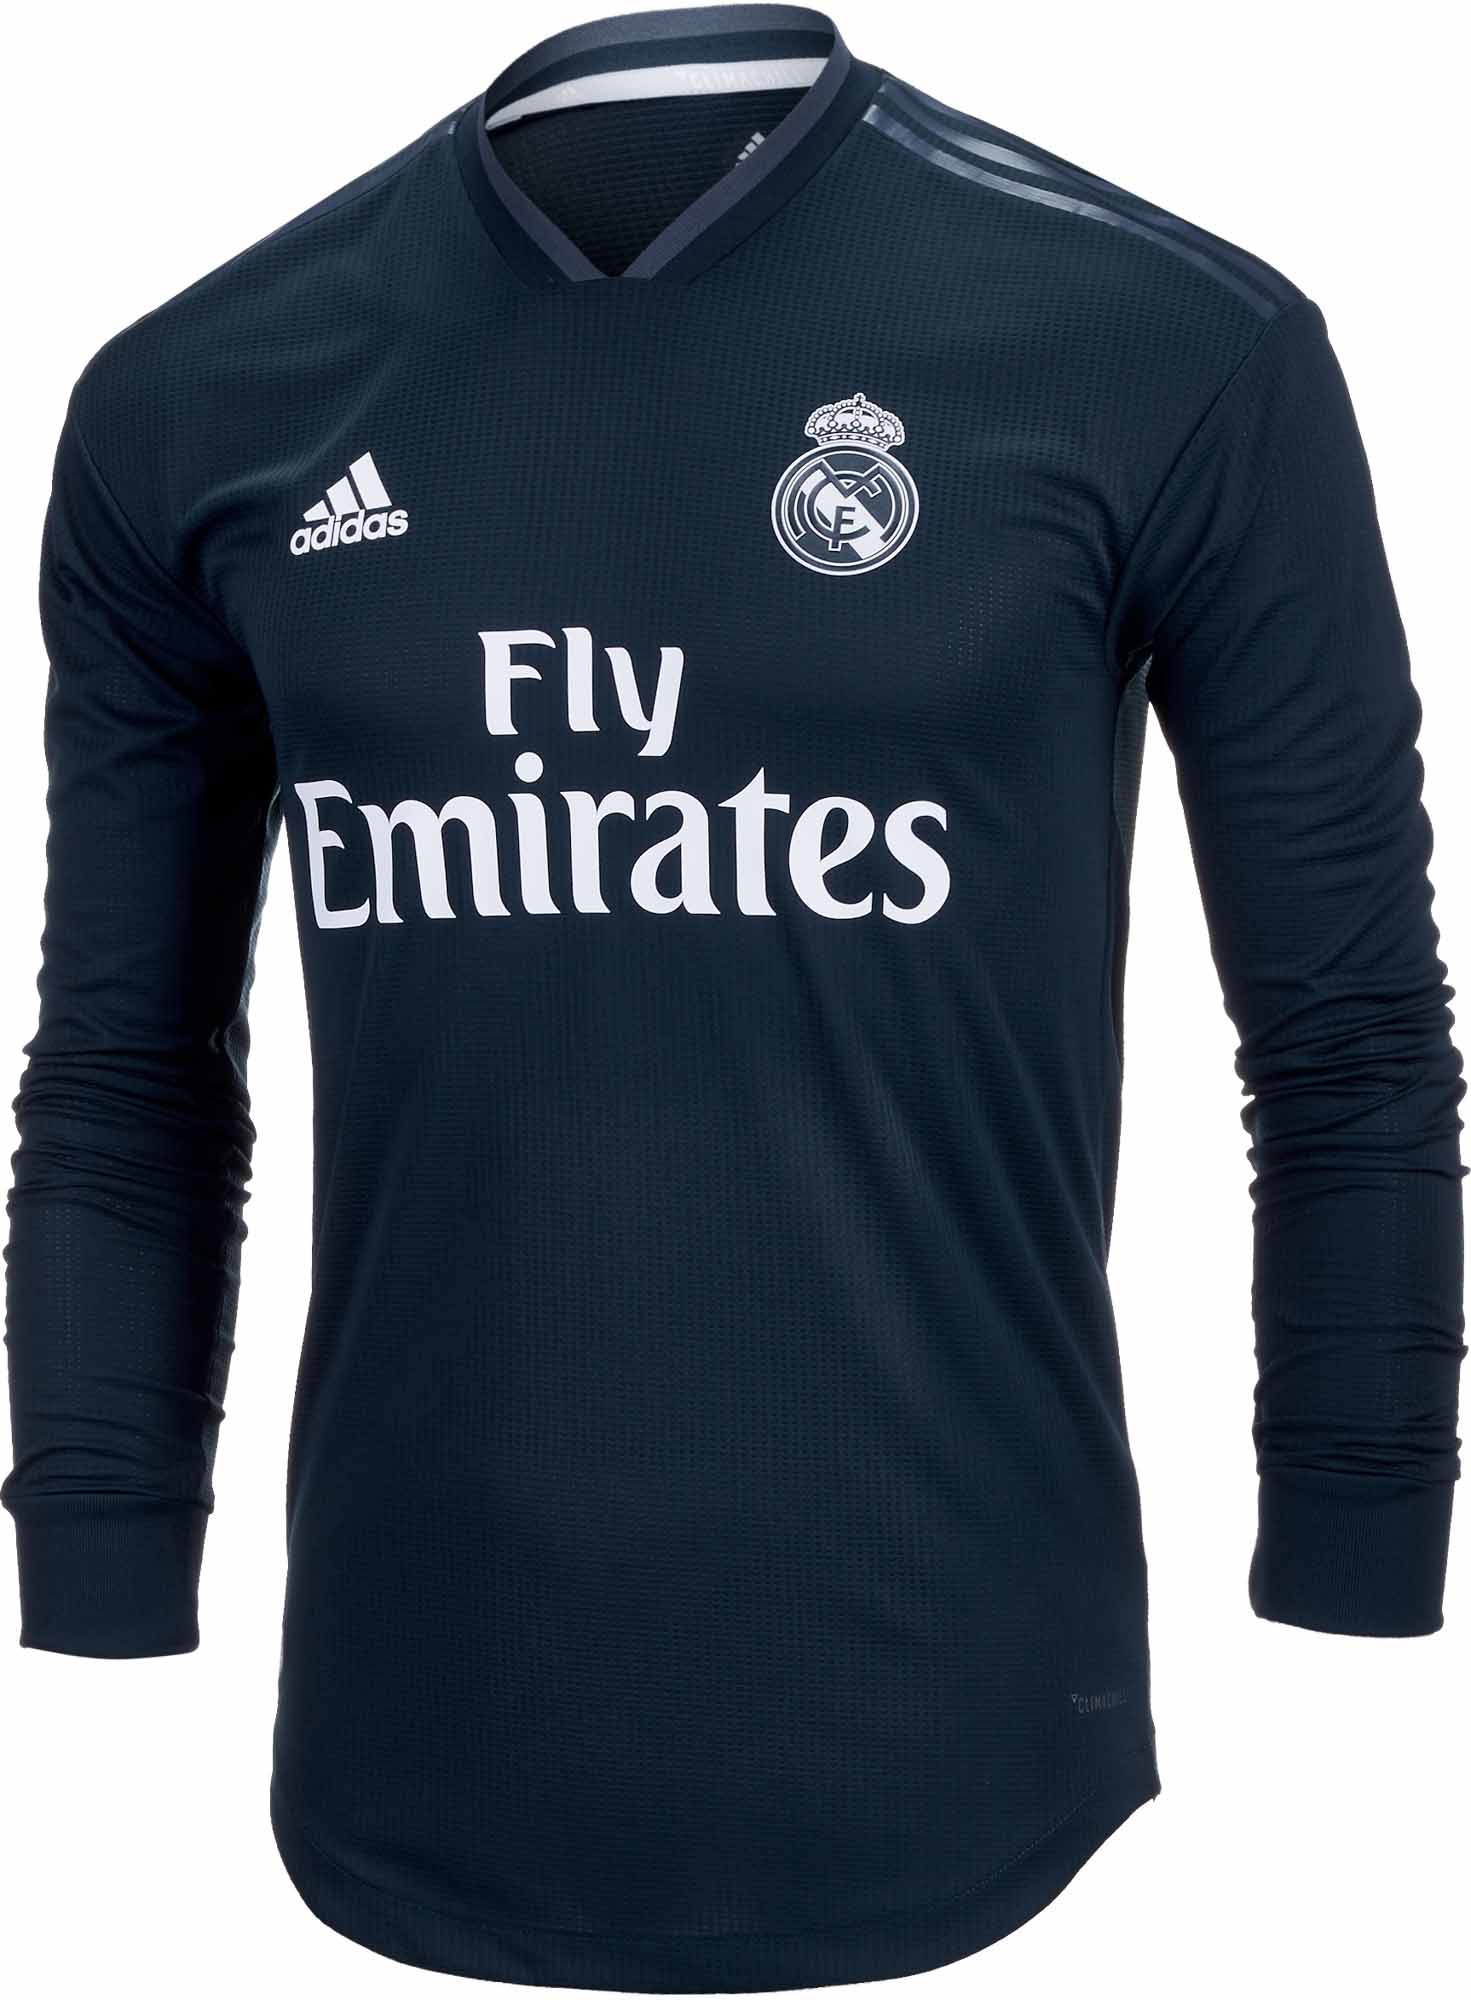 2018/19 adidas Toni Kroos Real Madrid Authentic L/S Away Jersey - SoccerPro